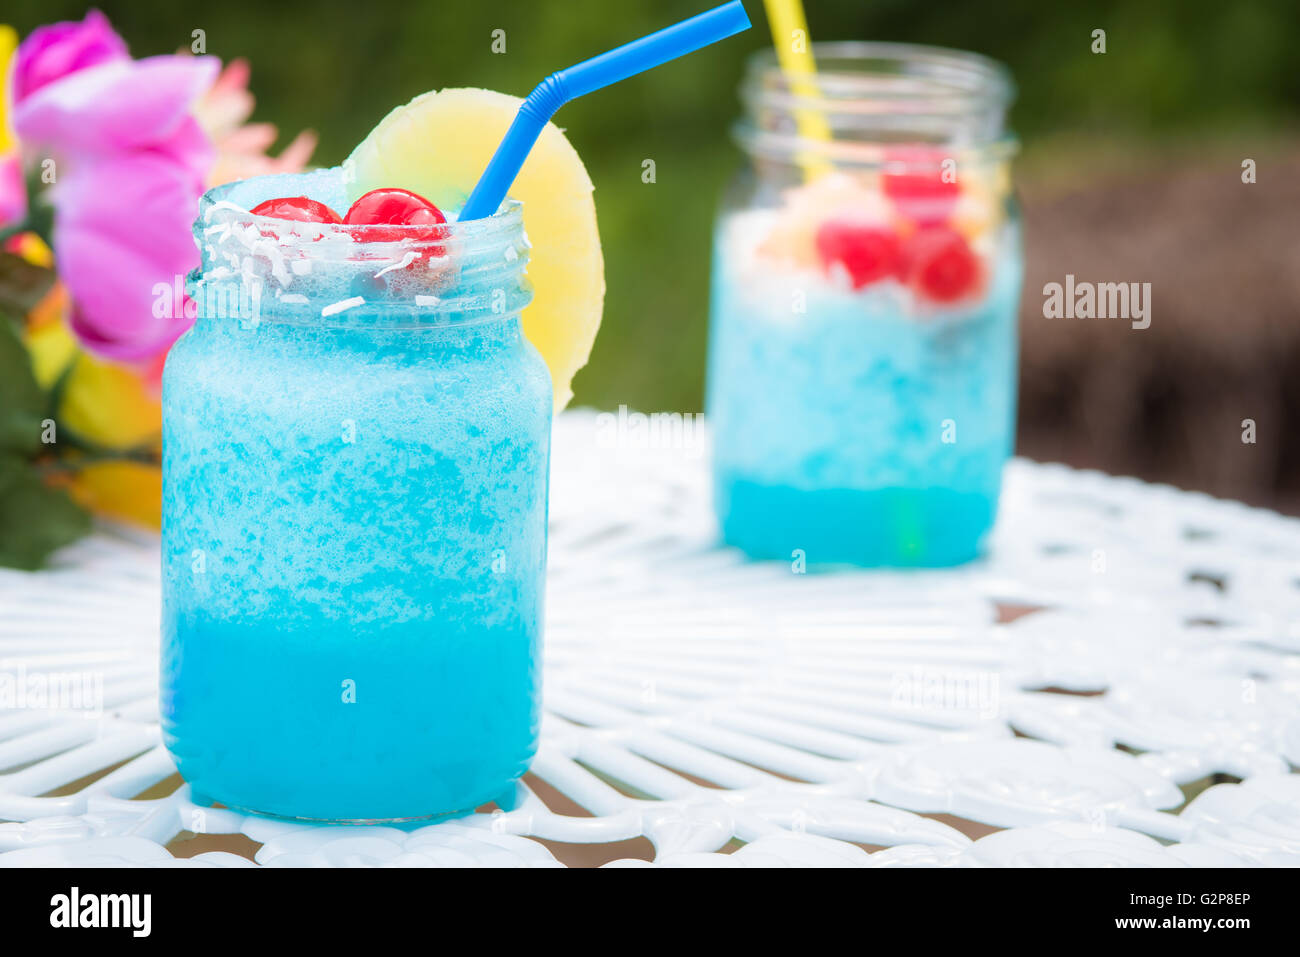 Blue cocktail drinks sitting on a white table in a mason jar Stock Photo